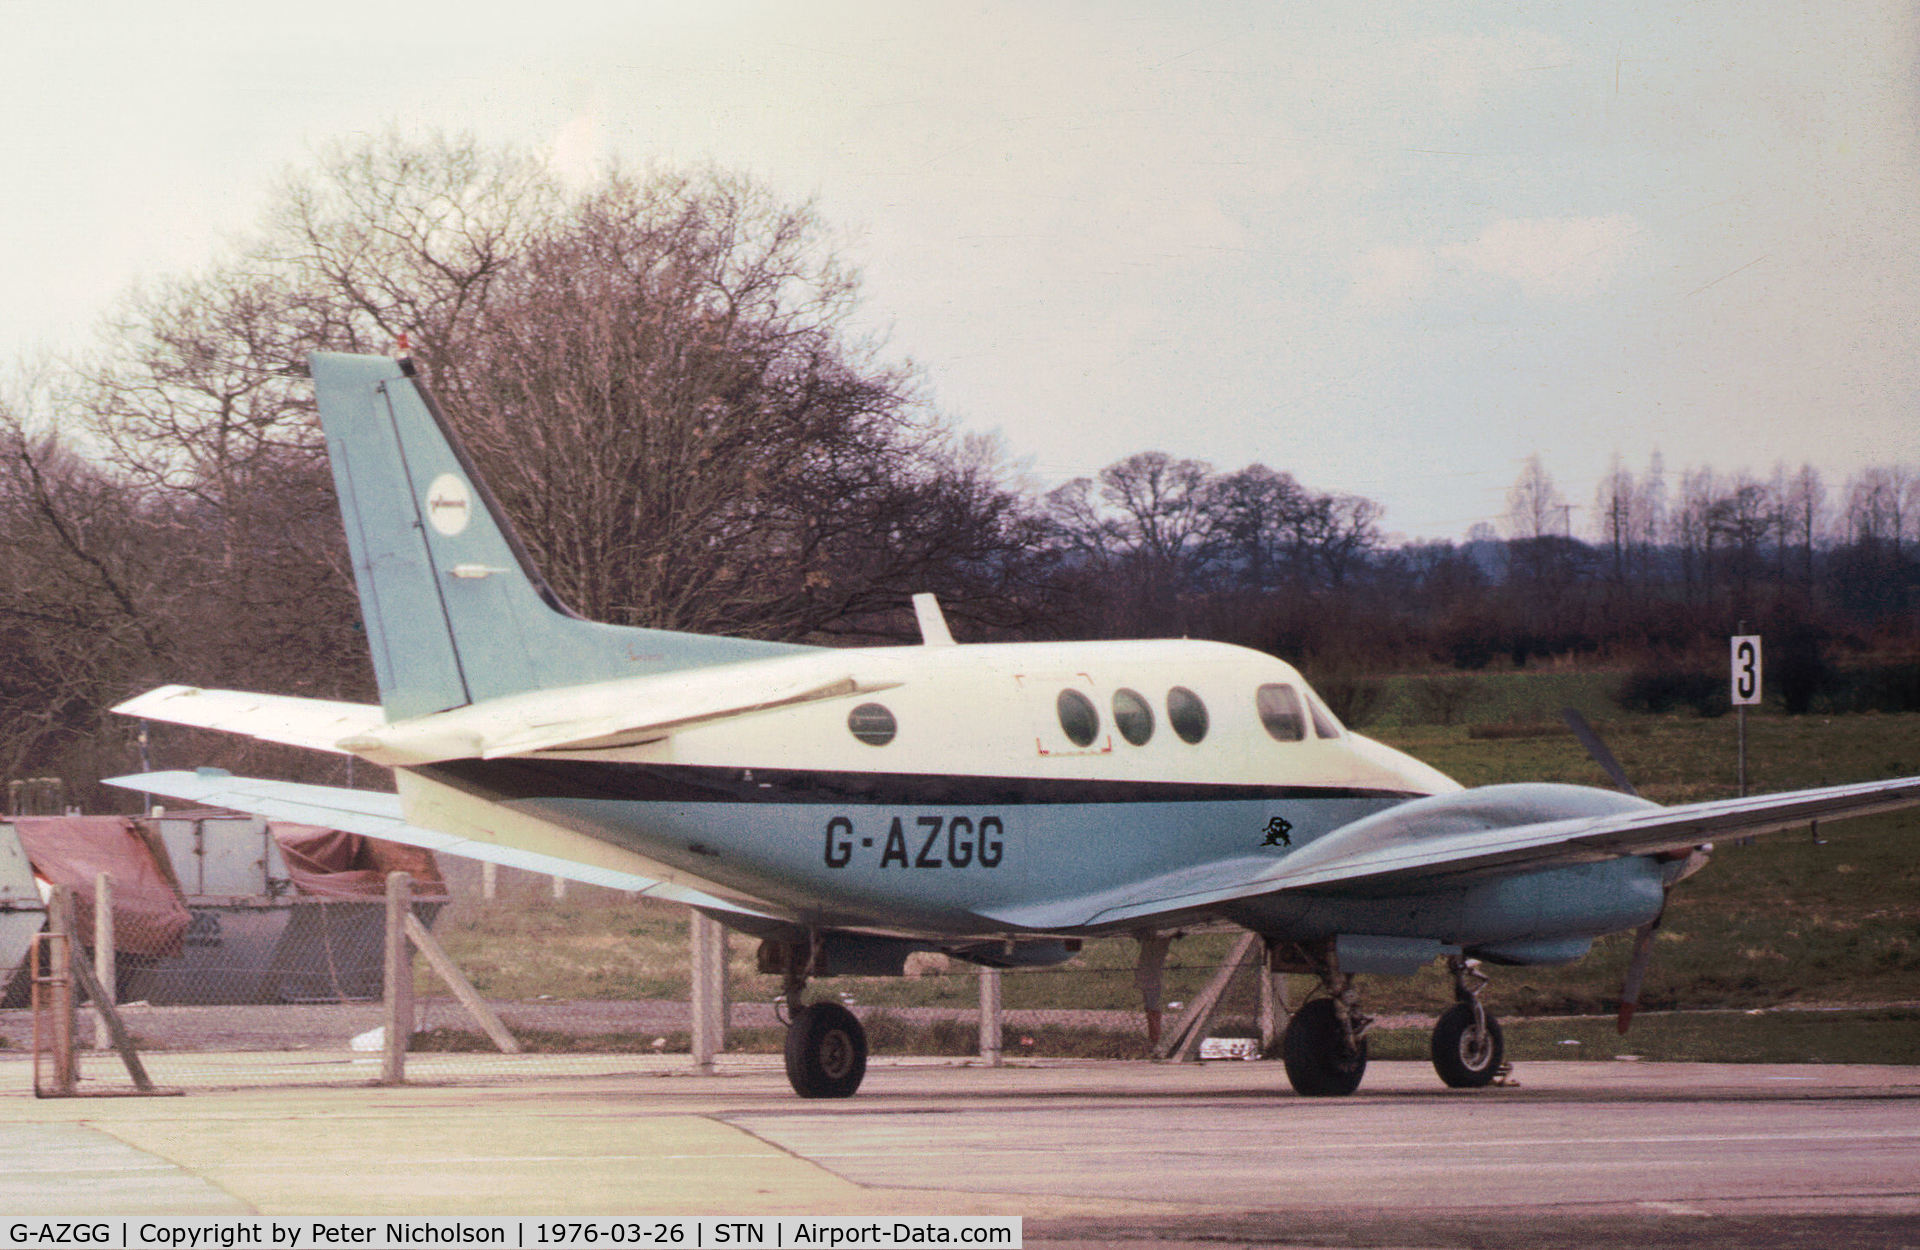 G-AZGG, 1971 Beech C90 King Air C/N LJ-543, Stansted resident Beech King Air C90 seen in March 1976.